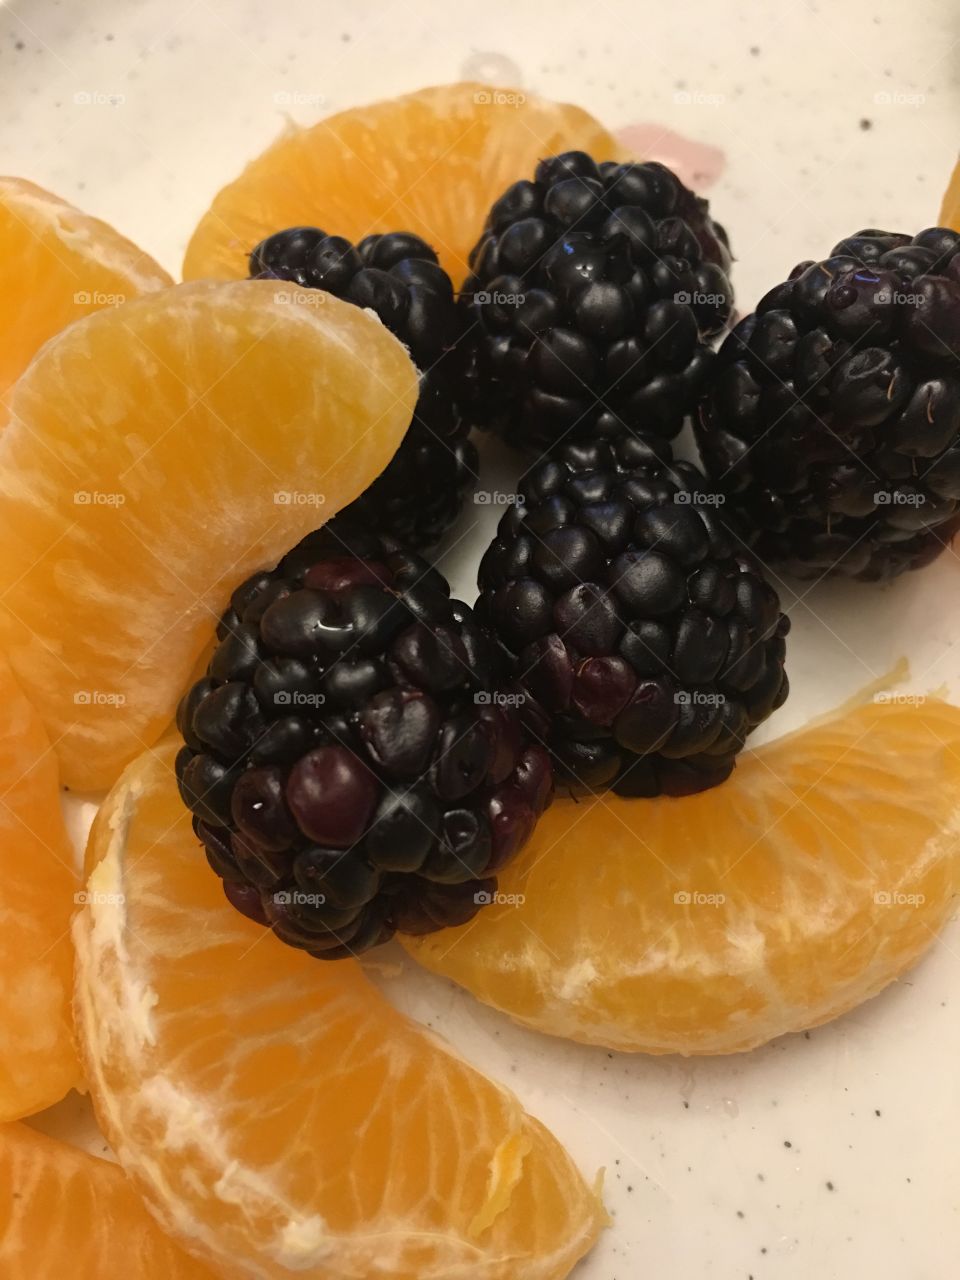 Bright and juicy orange and berries for breakfast